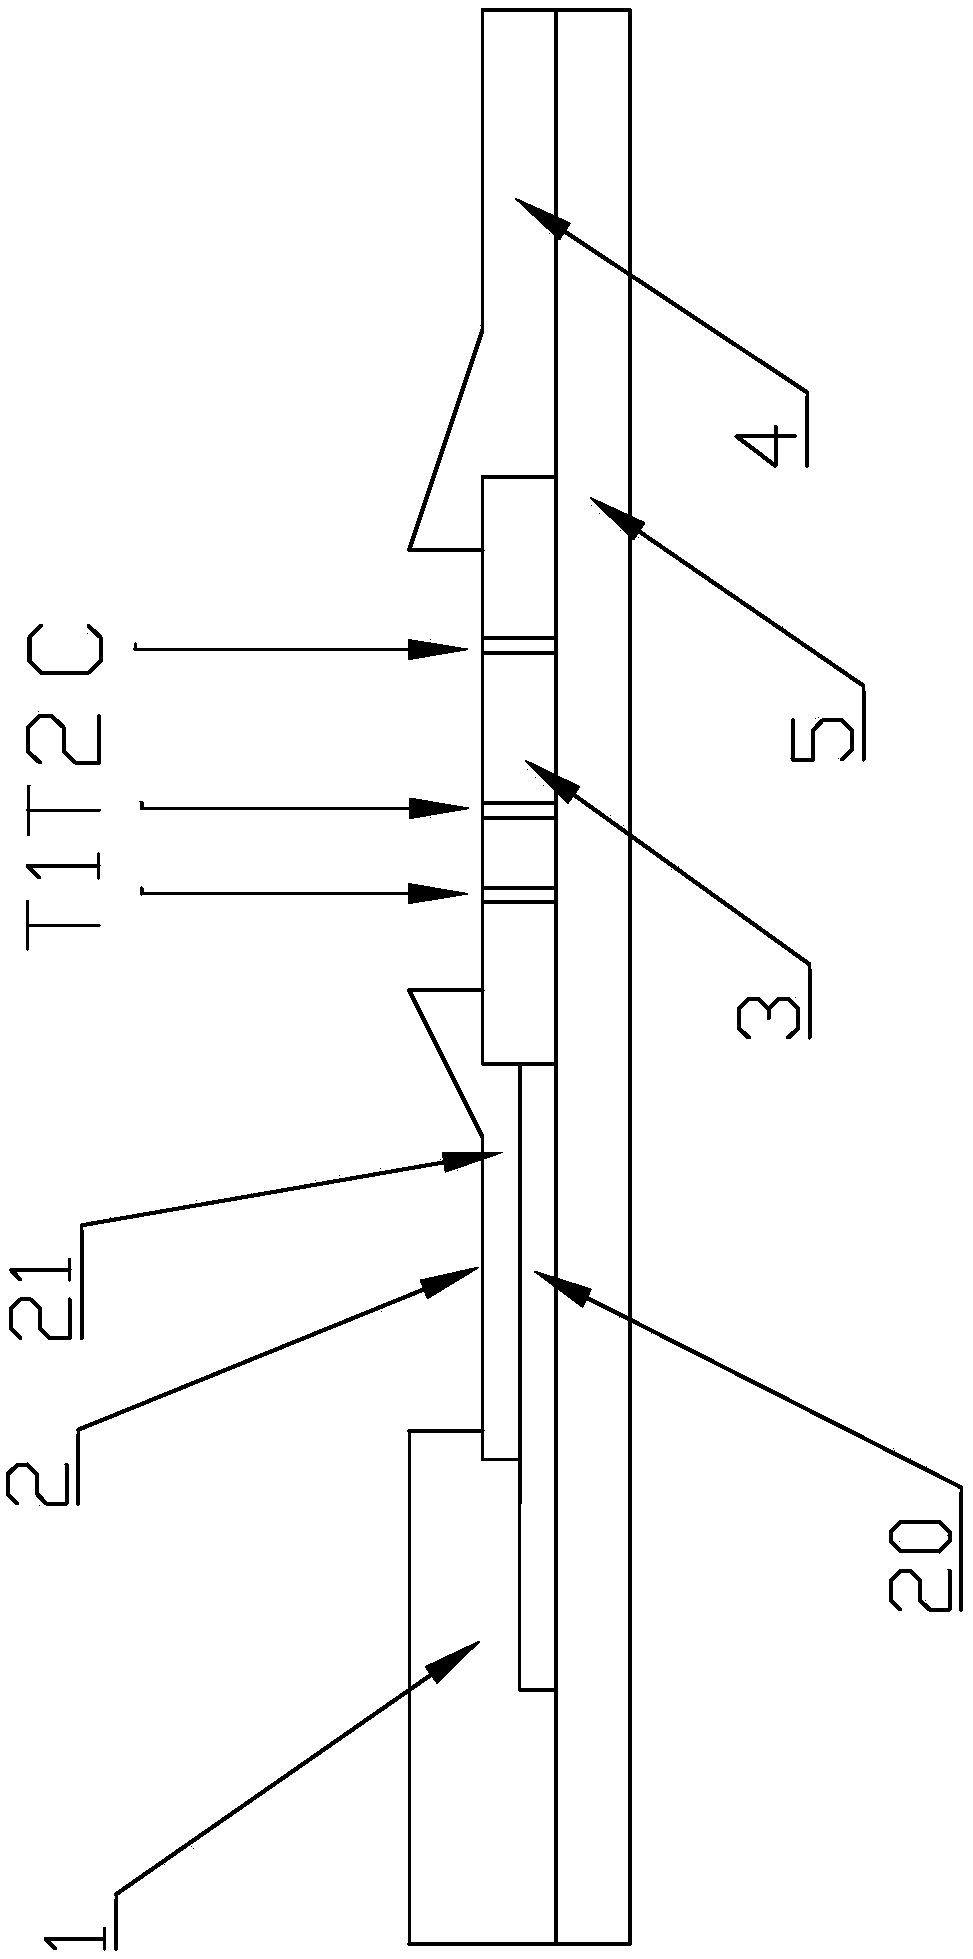 Test strip for immunochromatography-based rationed joint detection of C-reactive protein and serum amyloid A and manufacture method of test strip